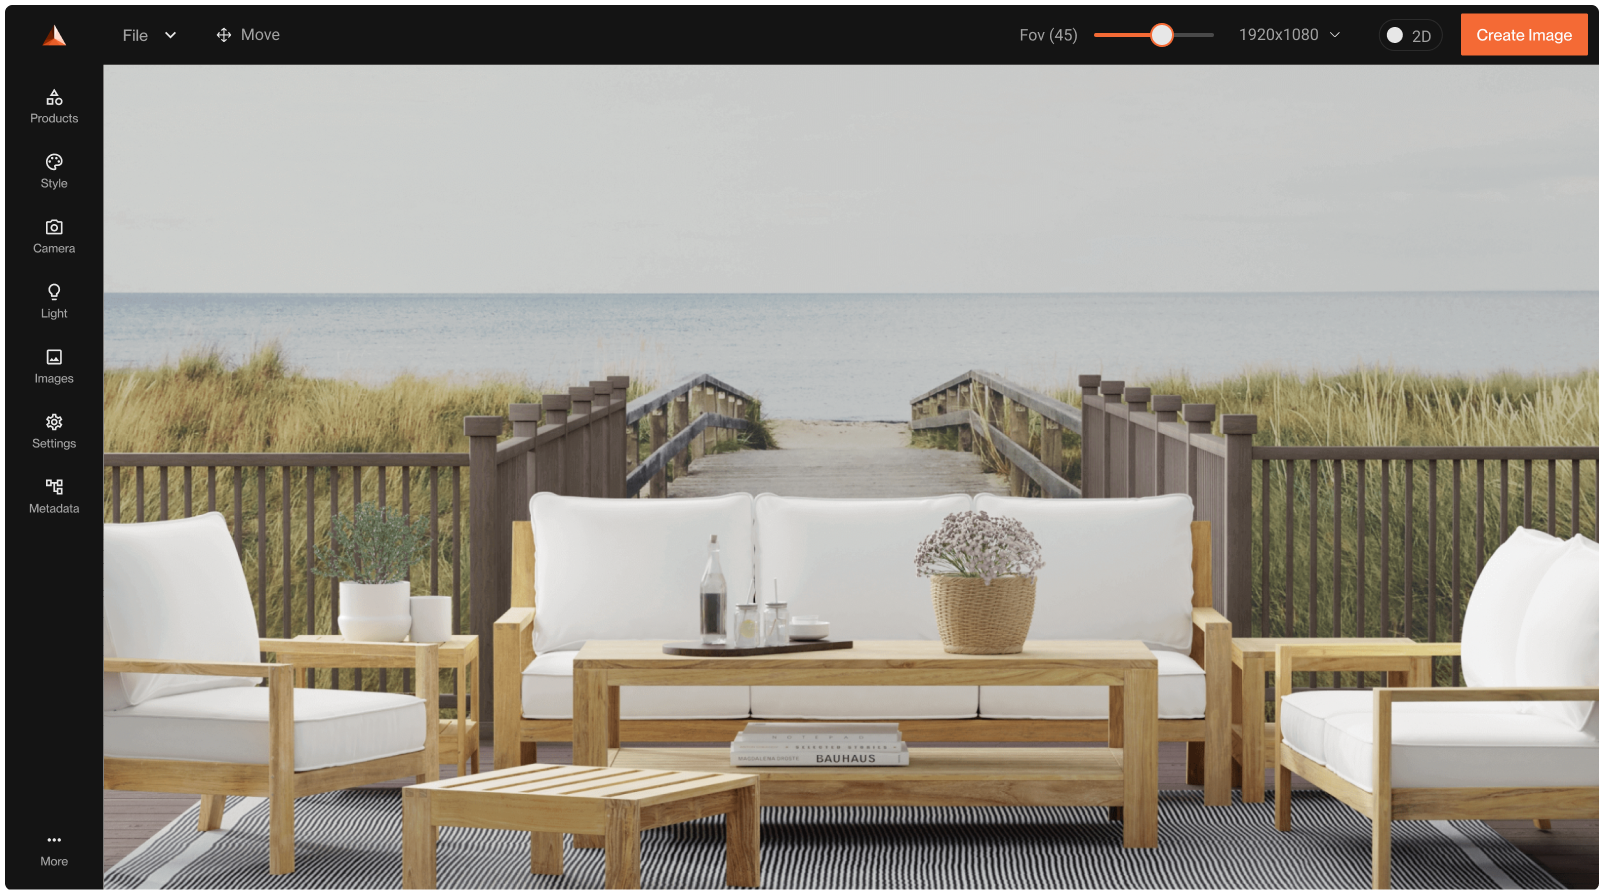 Outdoor teak conversation set with white cushions in 3D lifestyle template by the lake made in imagine.io